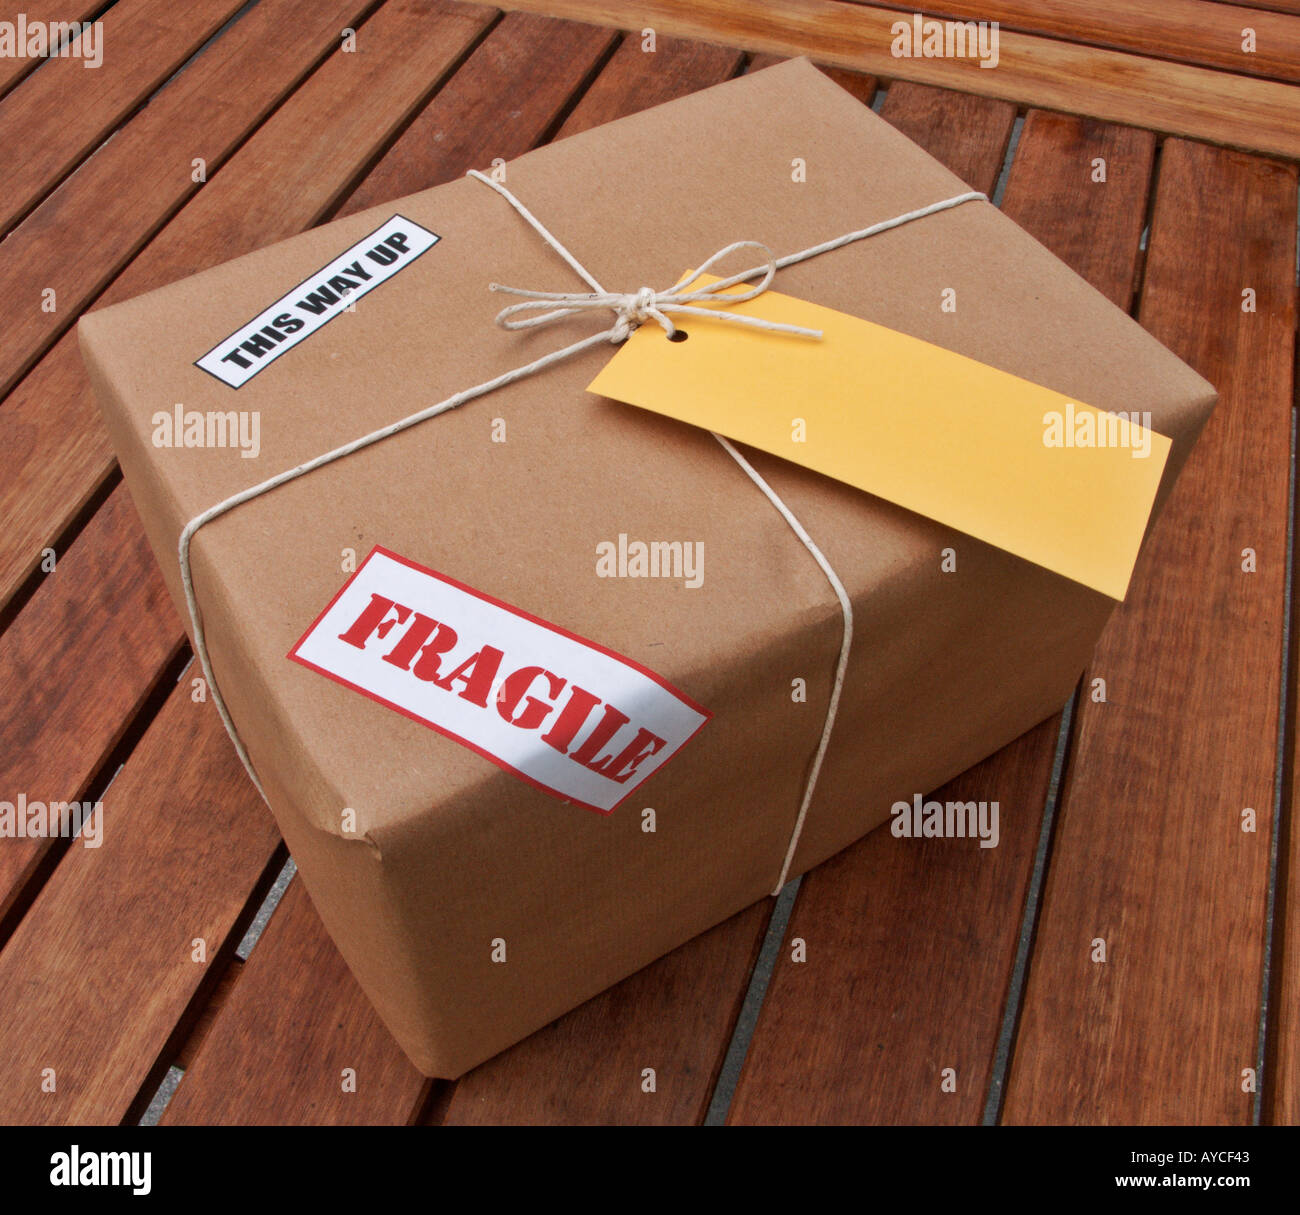 Parcel wrapped with brown packing paper Stock Photo by ©AndriiGorulko  9972809